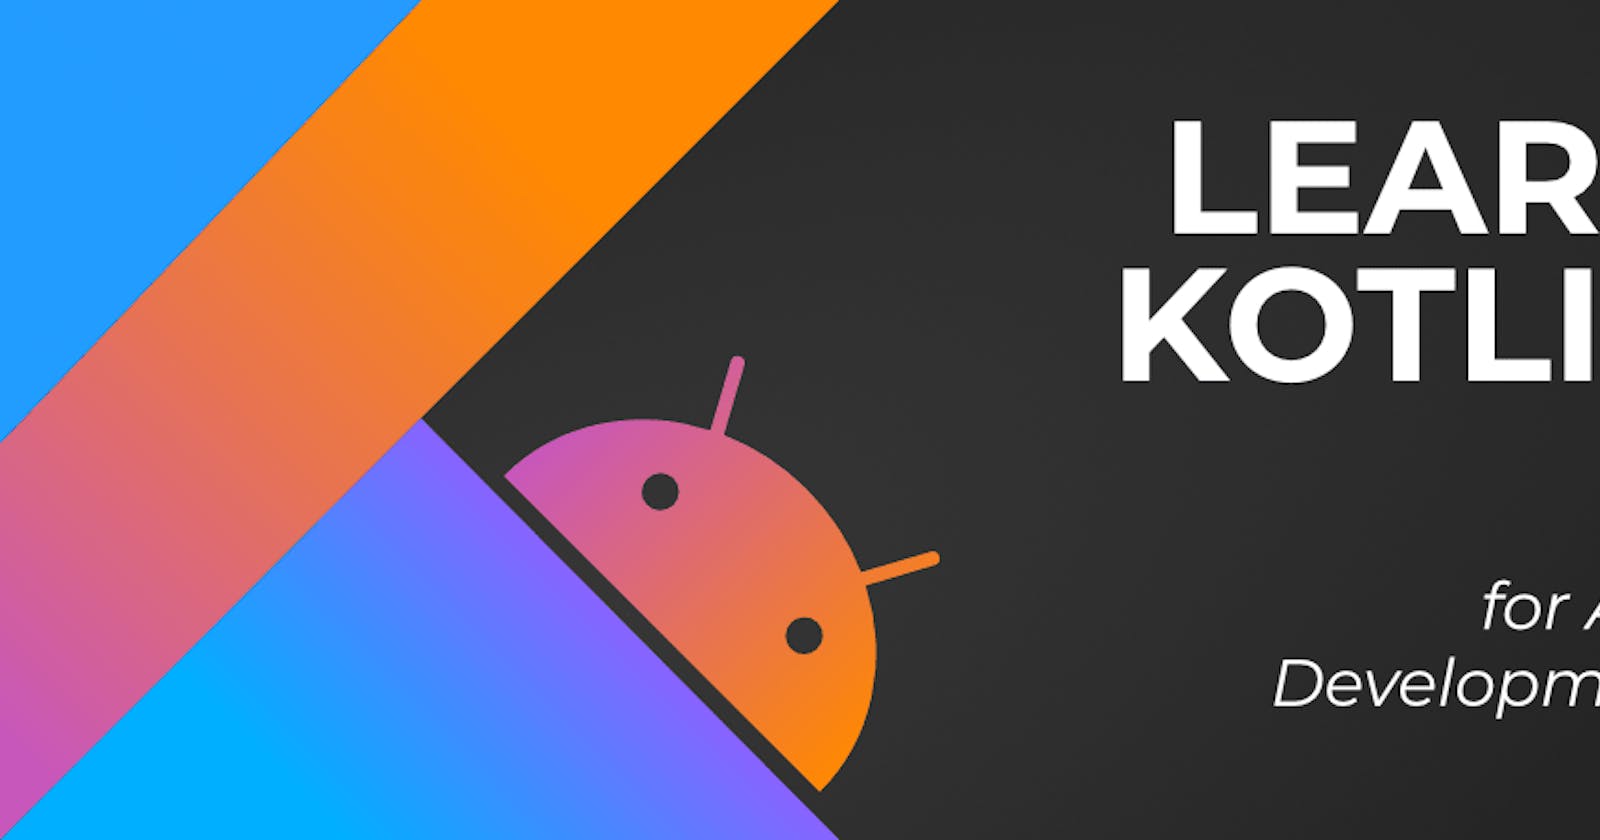 Why Kotlin for Android Development?